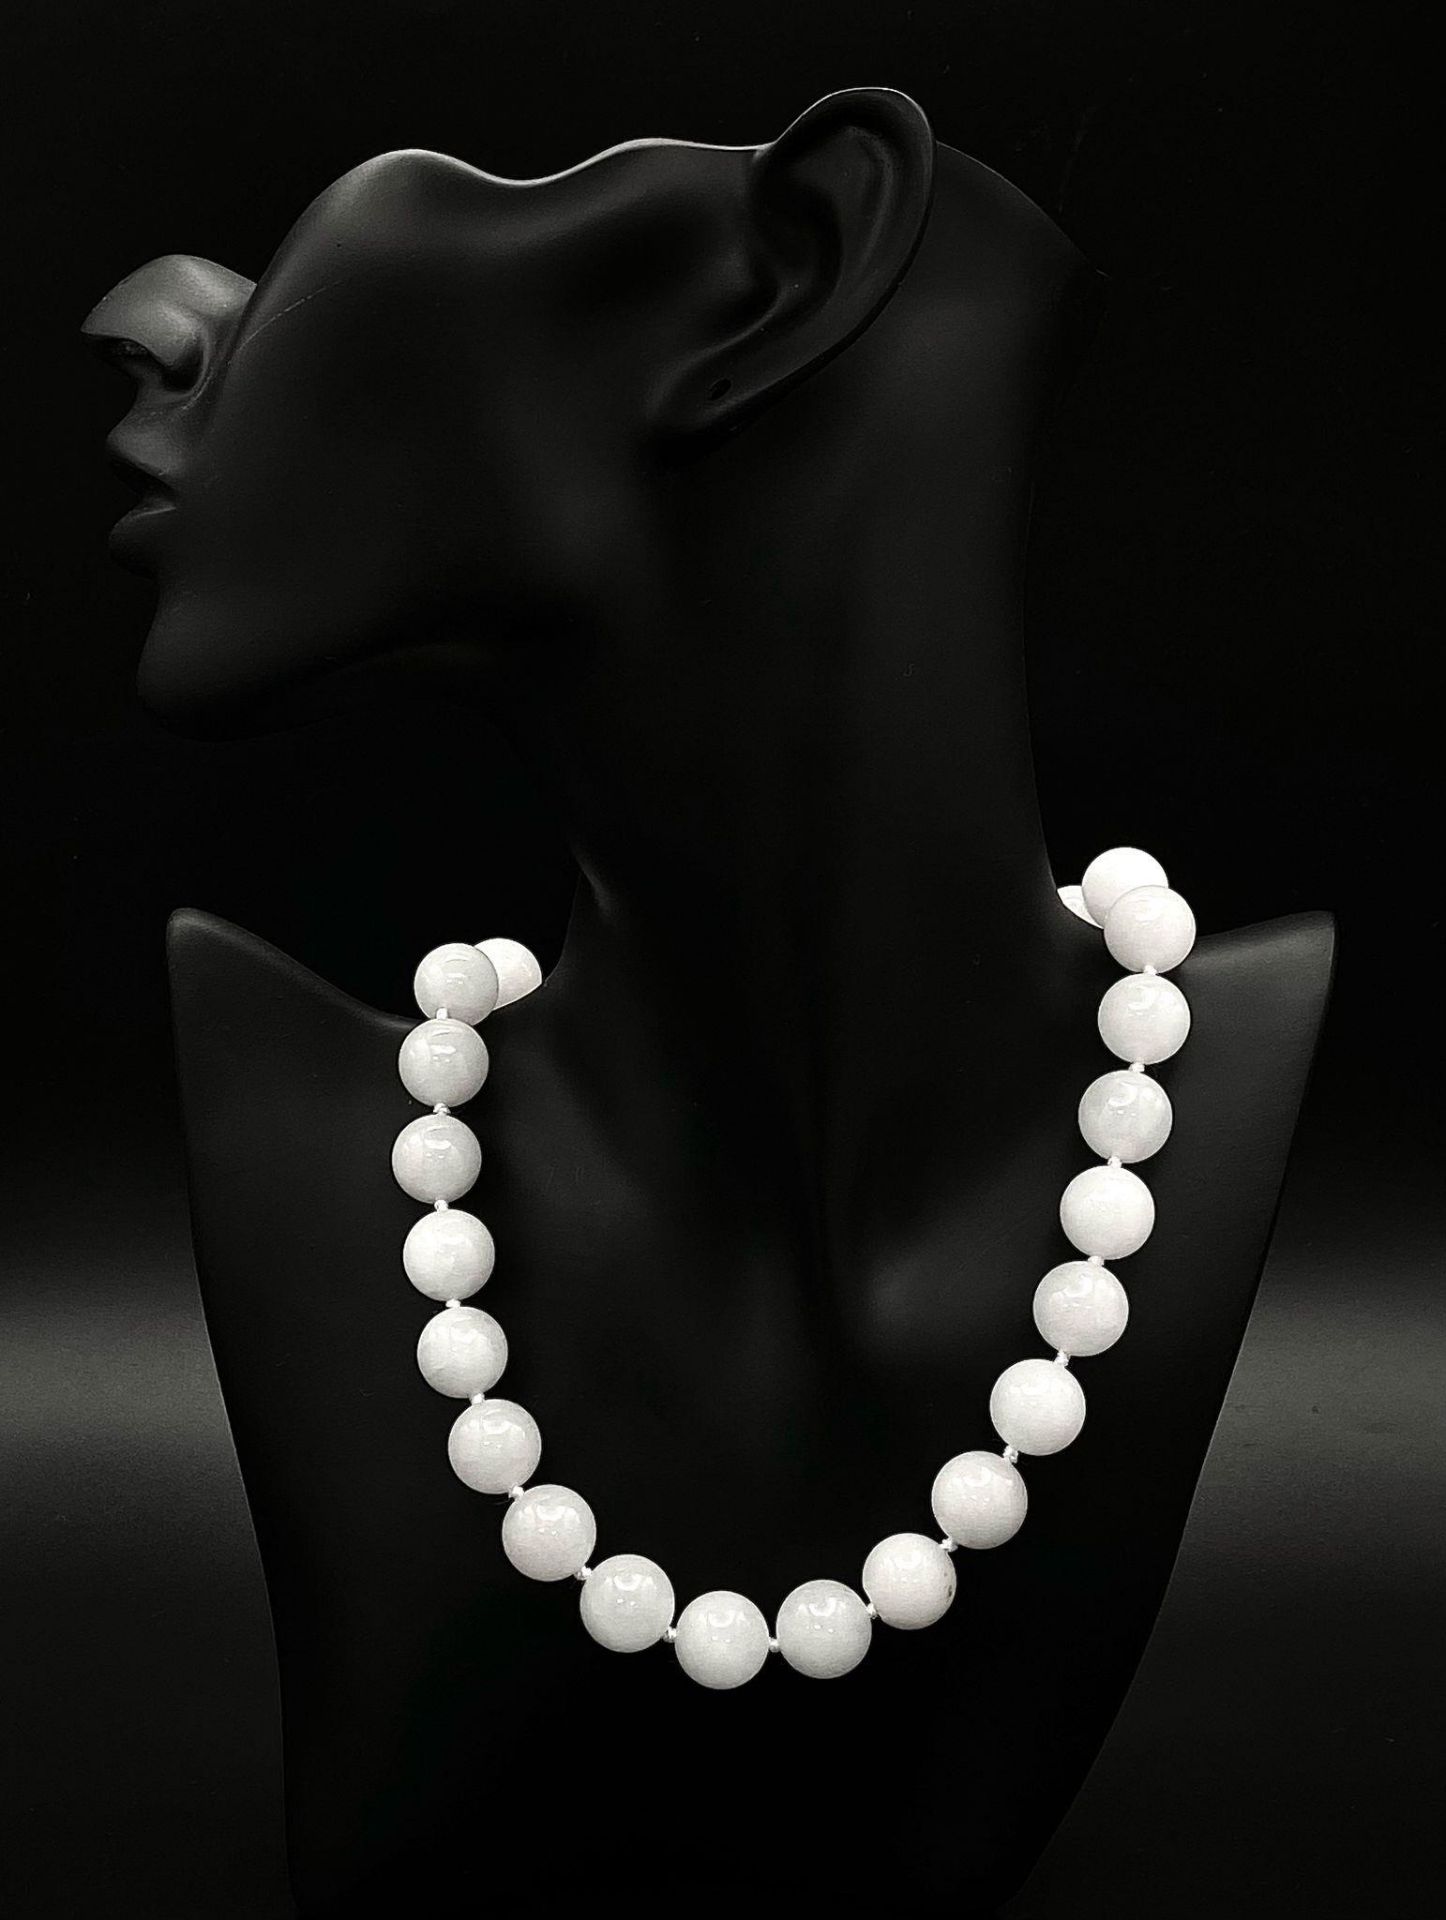 A Bright White Jade Bead Necklace. Good sized beads - 14mm. 42cm necklace length. Lifesaver clasp.